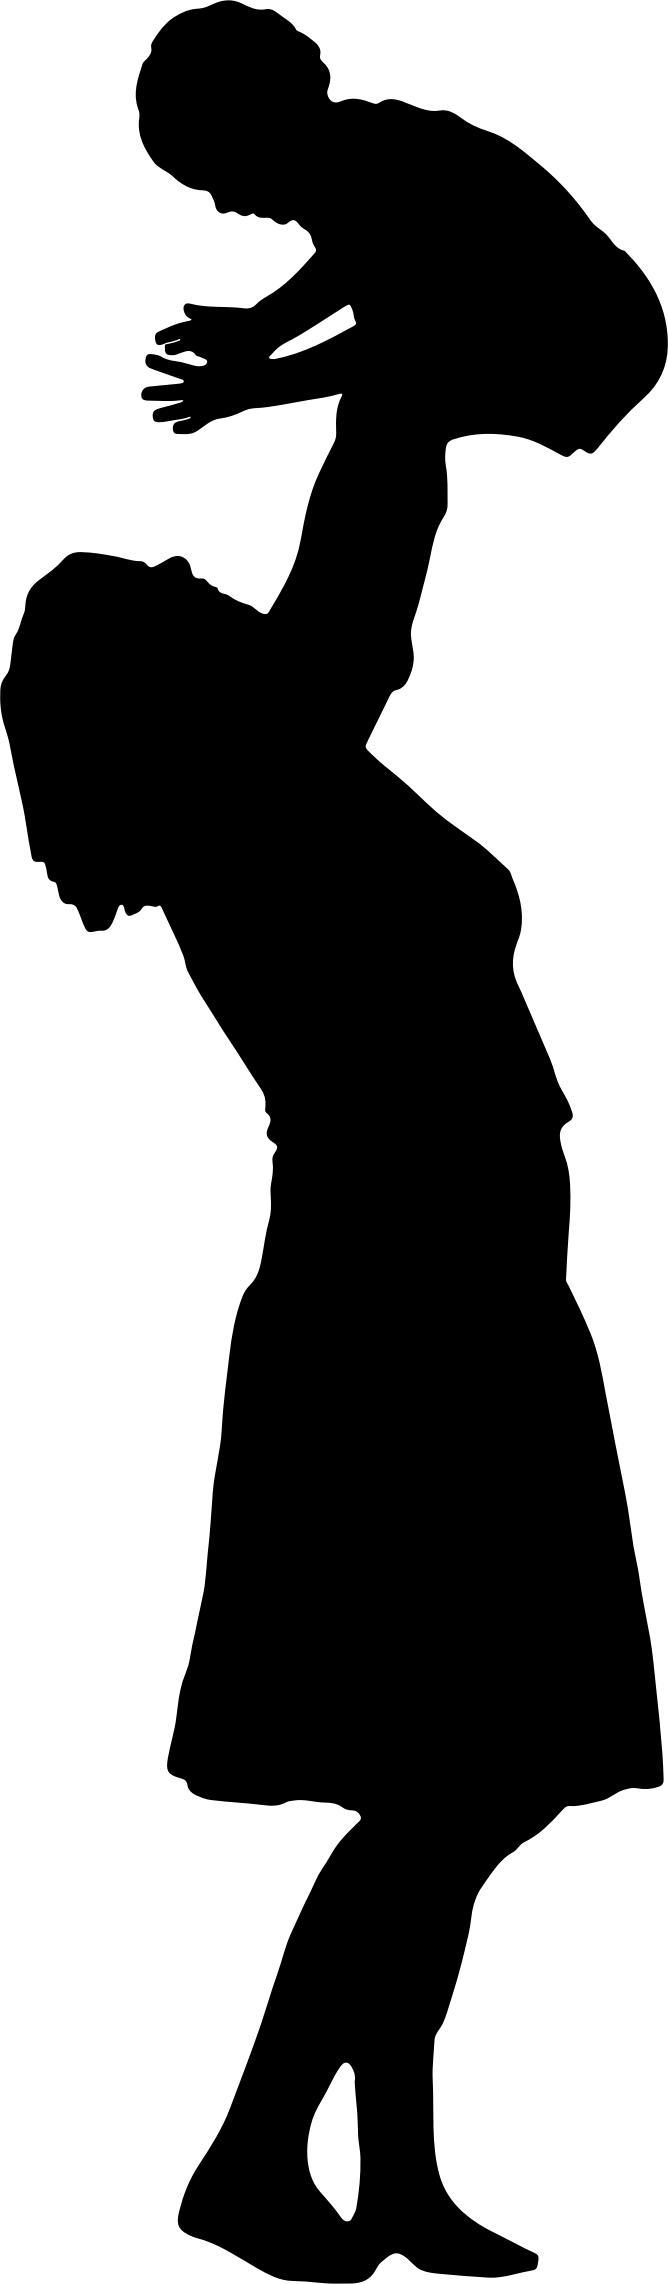 Mother Playing With Child Silhouette png transparent